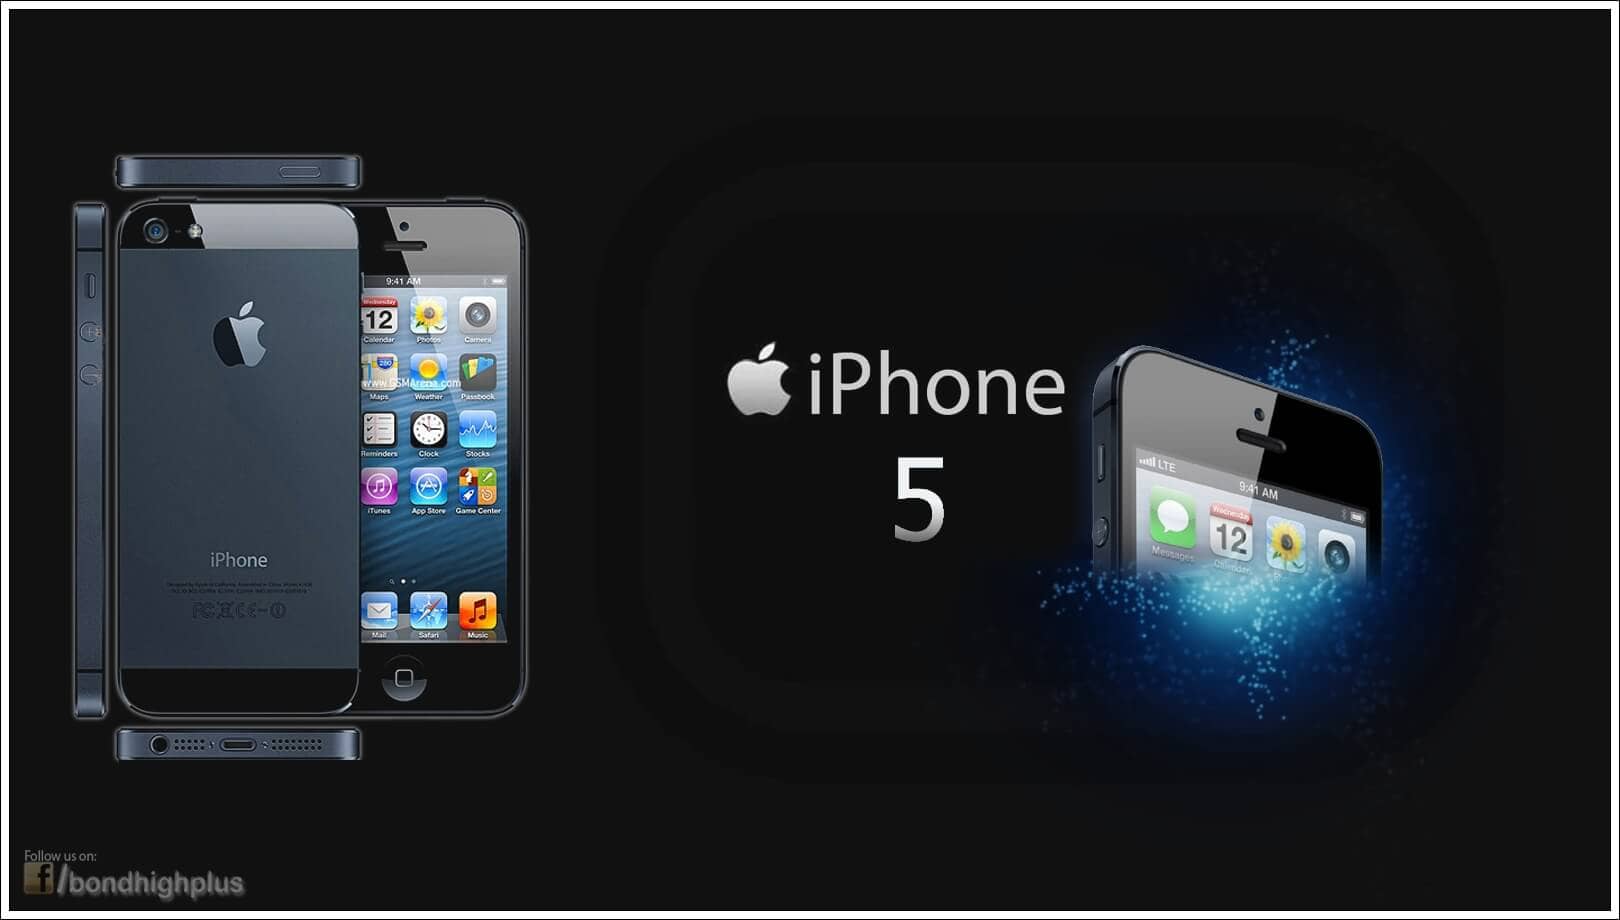 Differences between Apple iPhone 5 and 4S